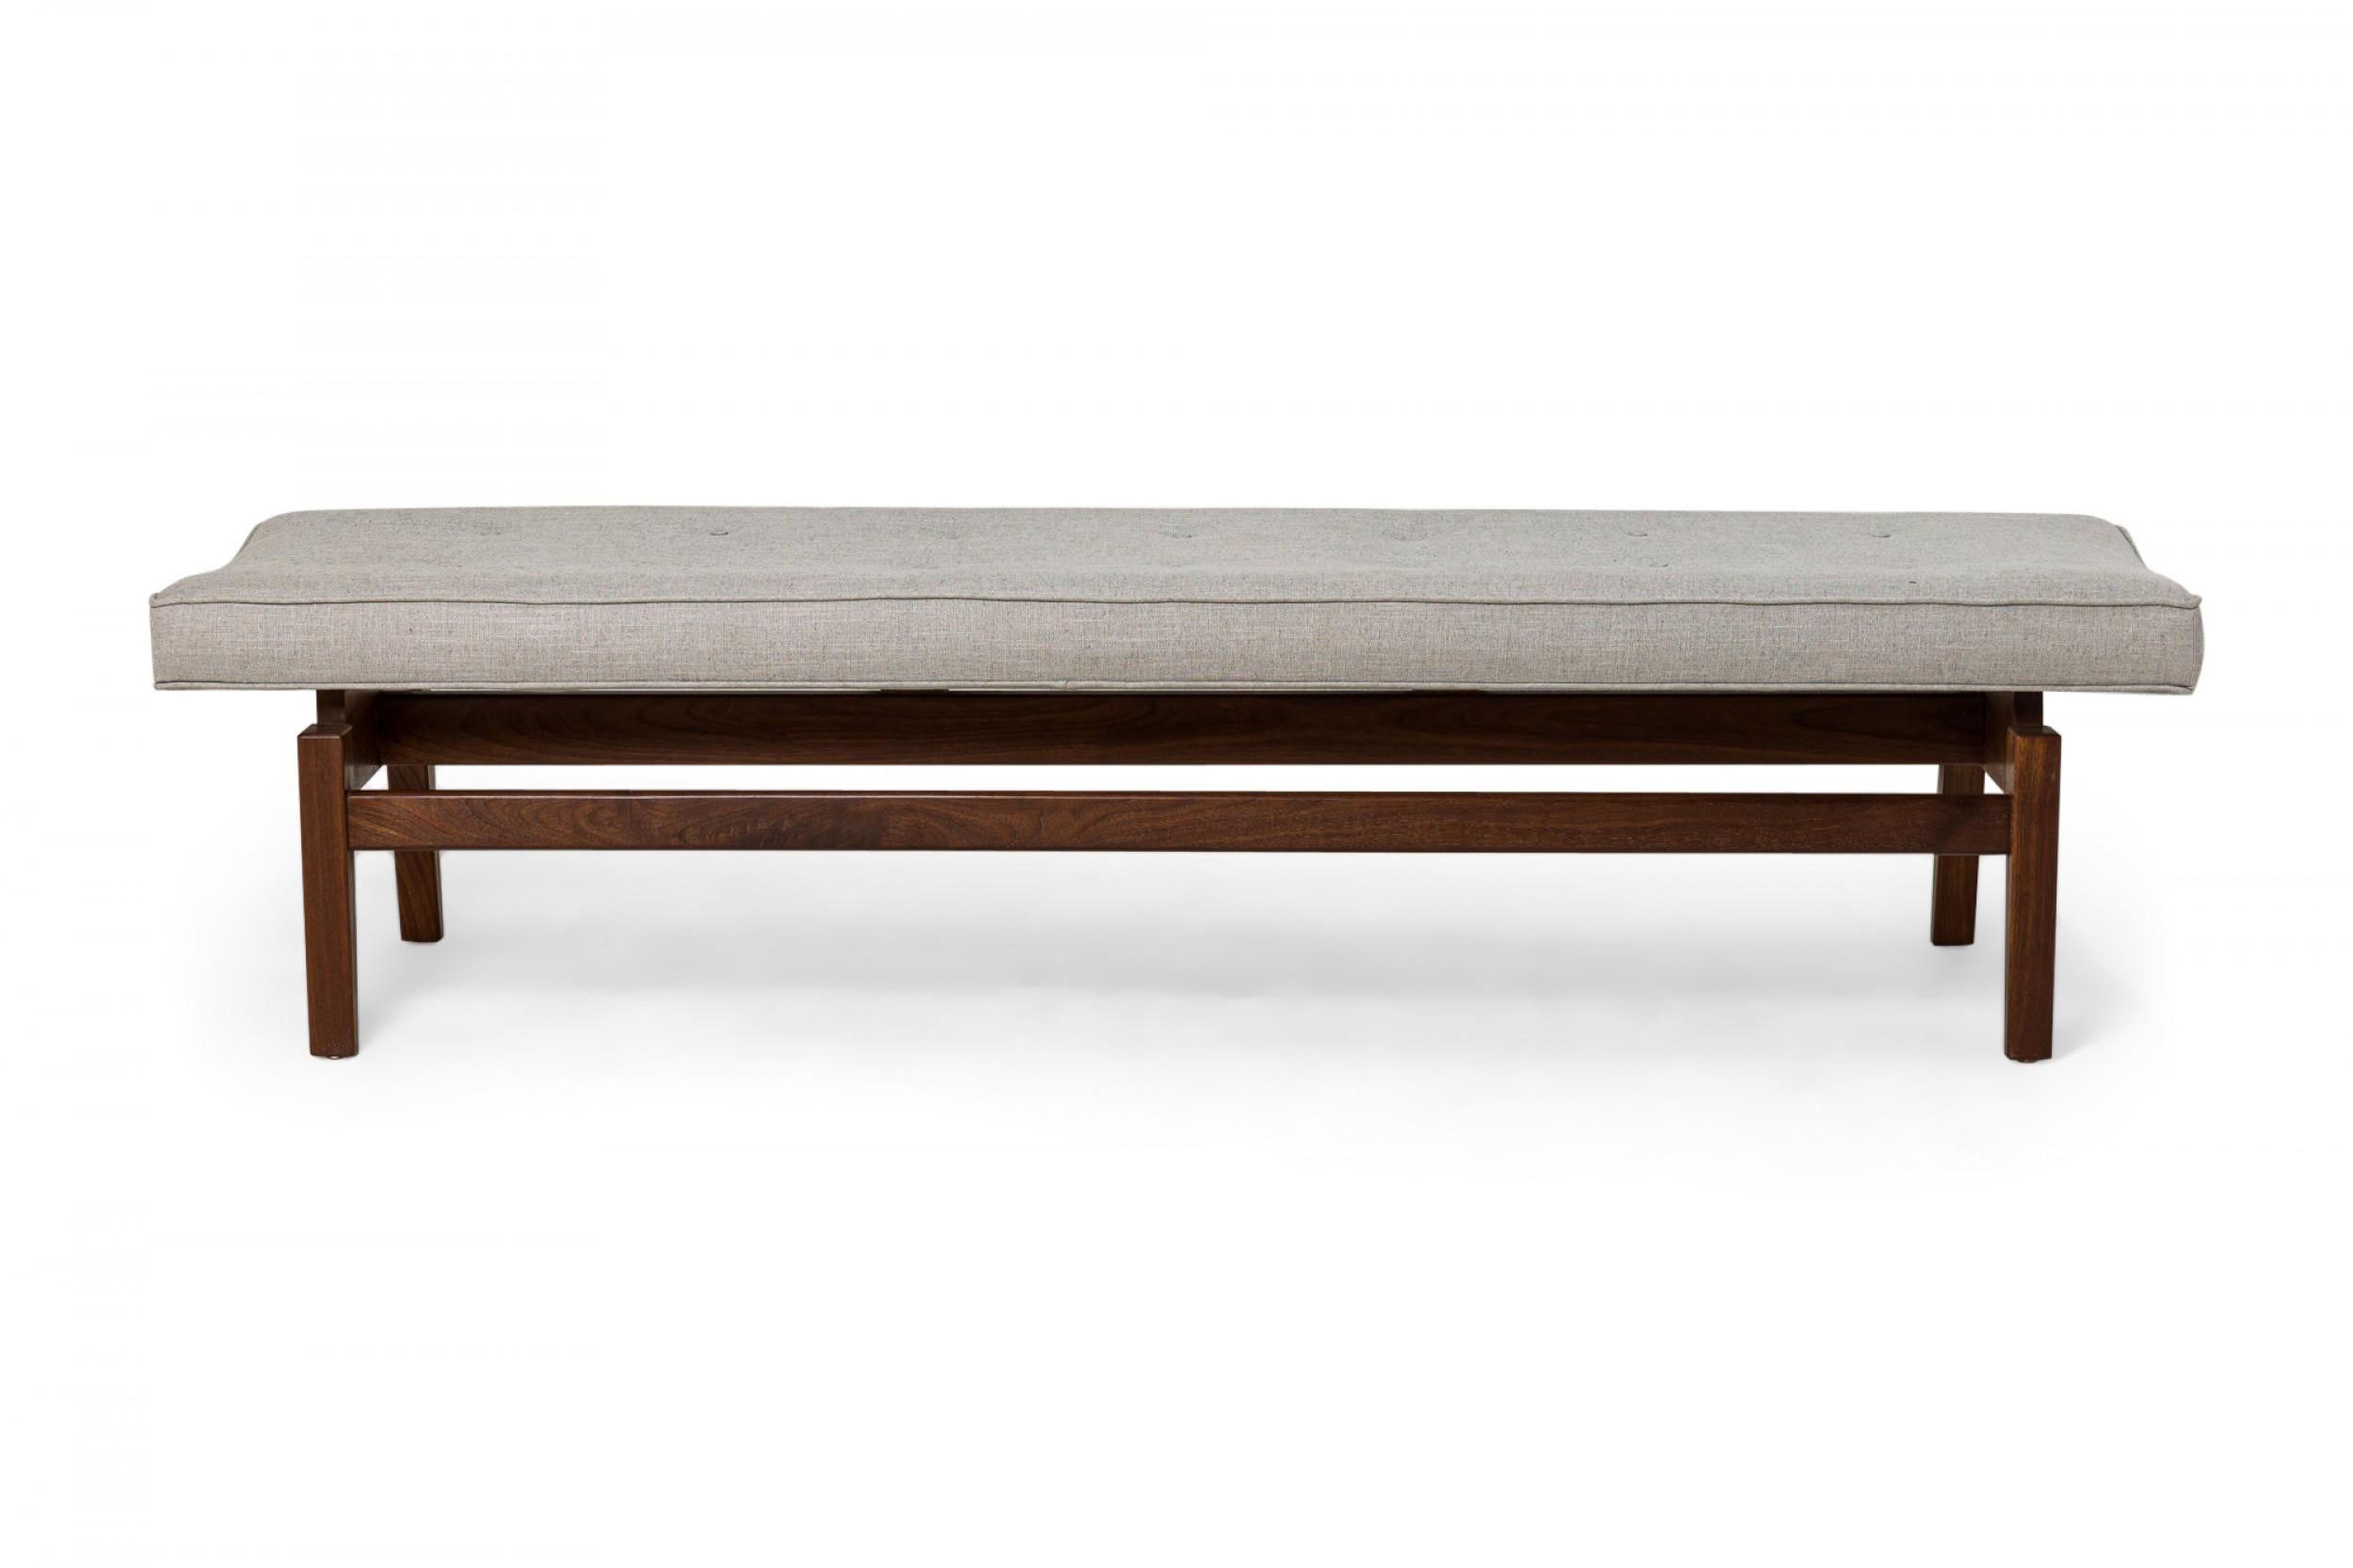 Danish Mid-Century floating bench with a walnut stretcher base supporting a rectangular seat cushion upholstered in light gray woven fabric with button tufted detail. (JENS RISOM).
 